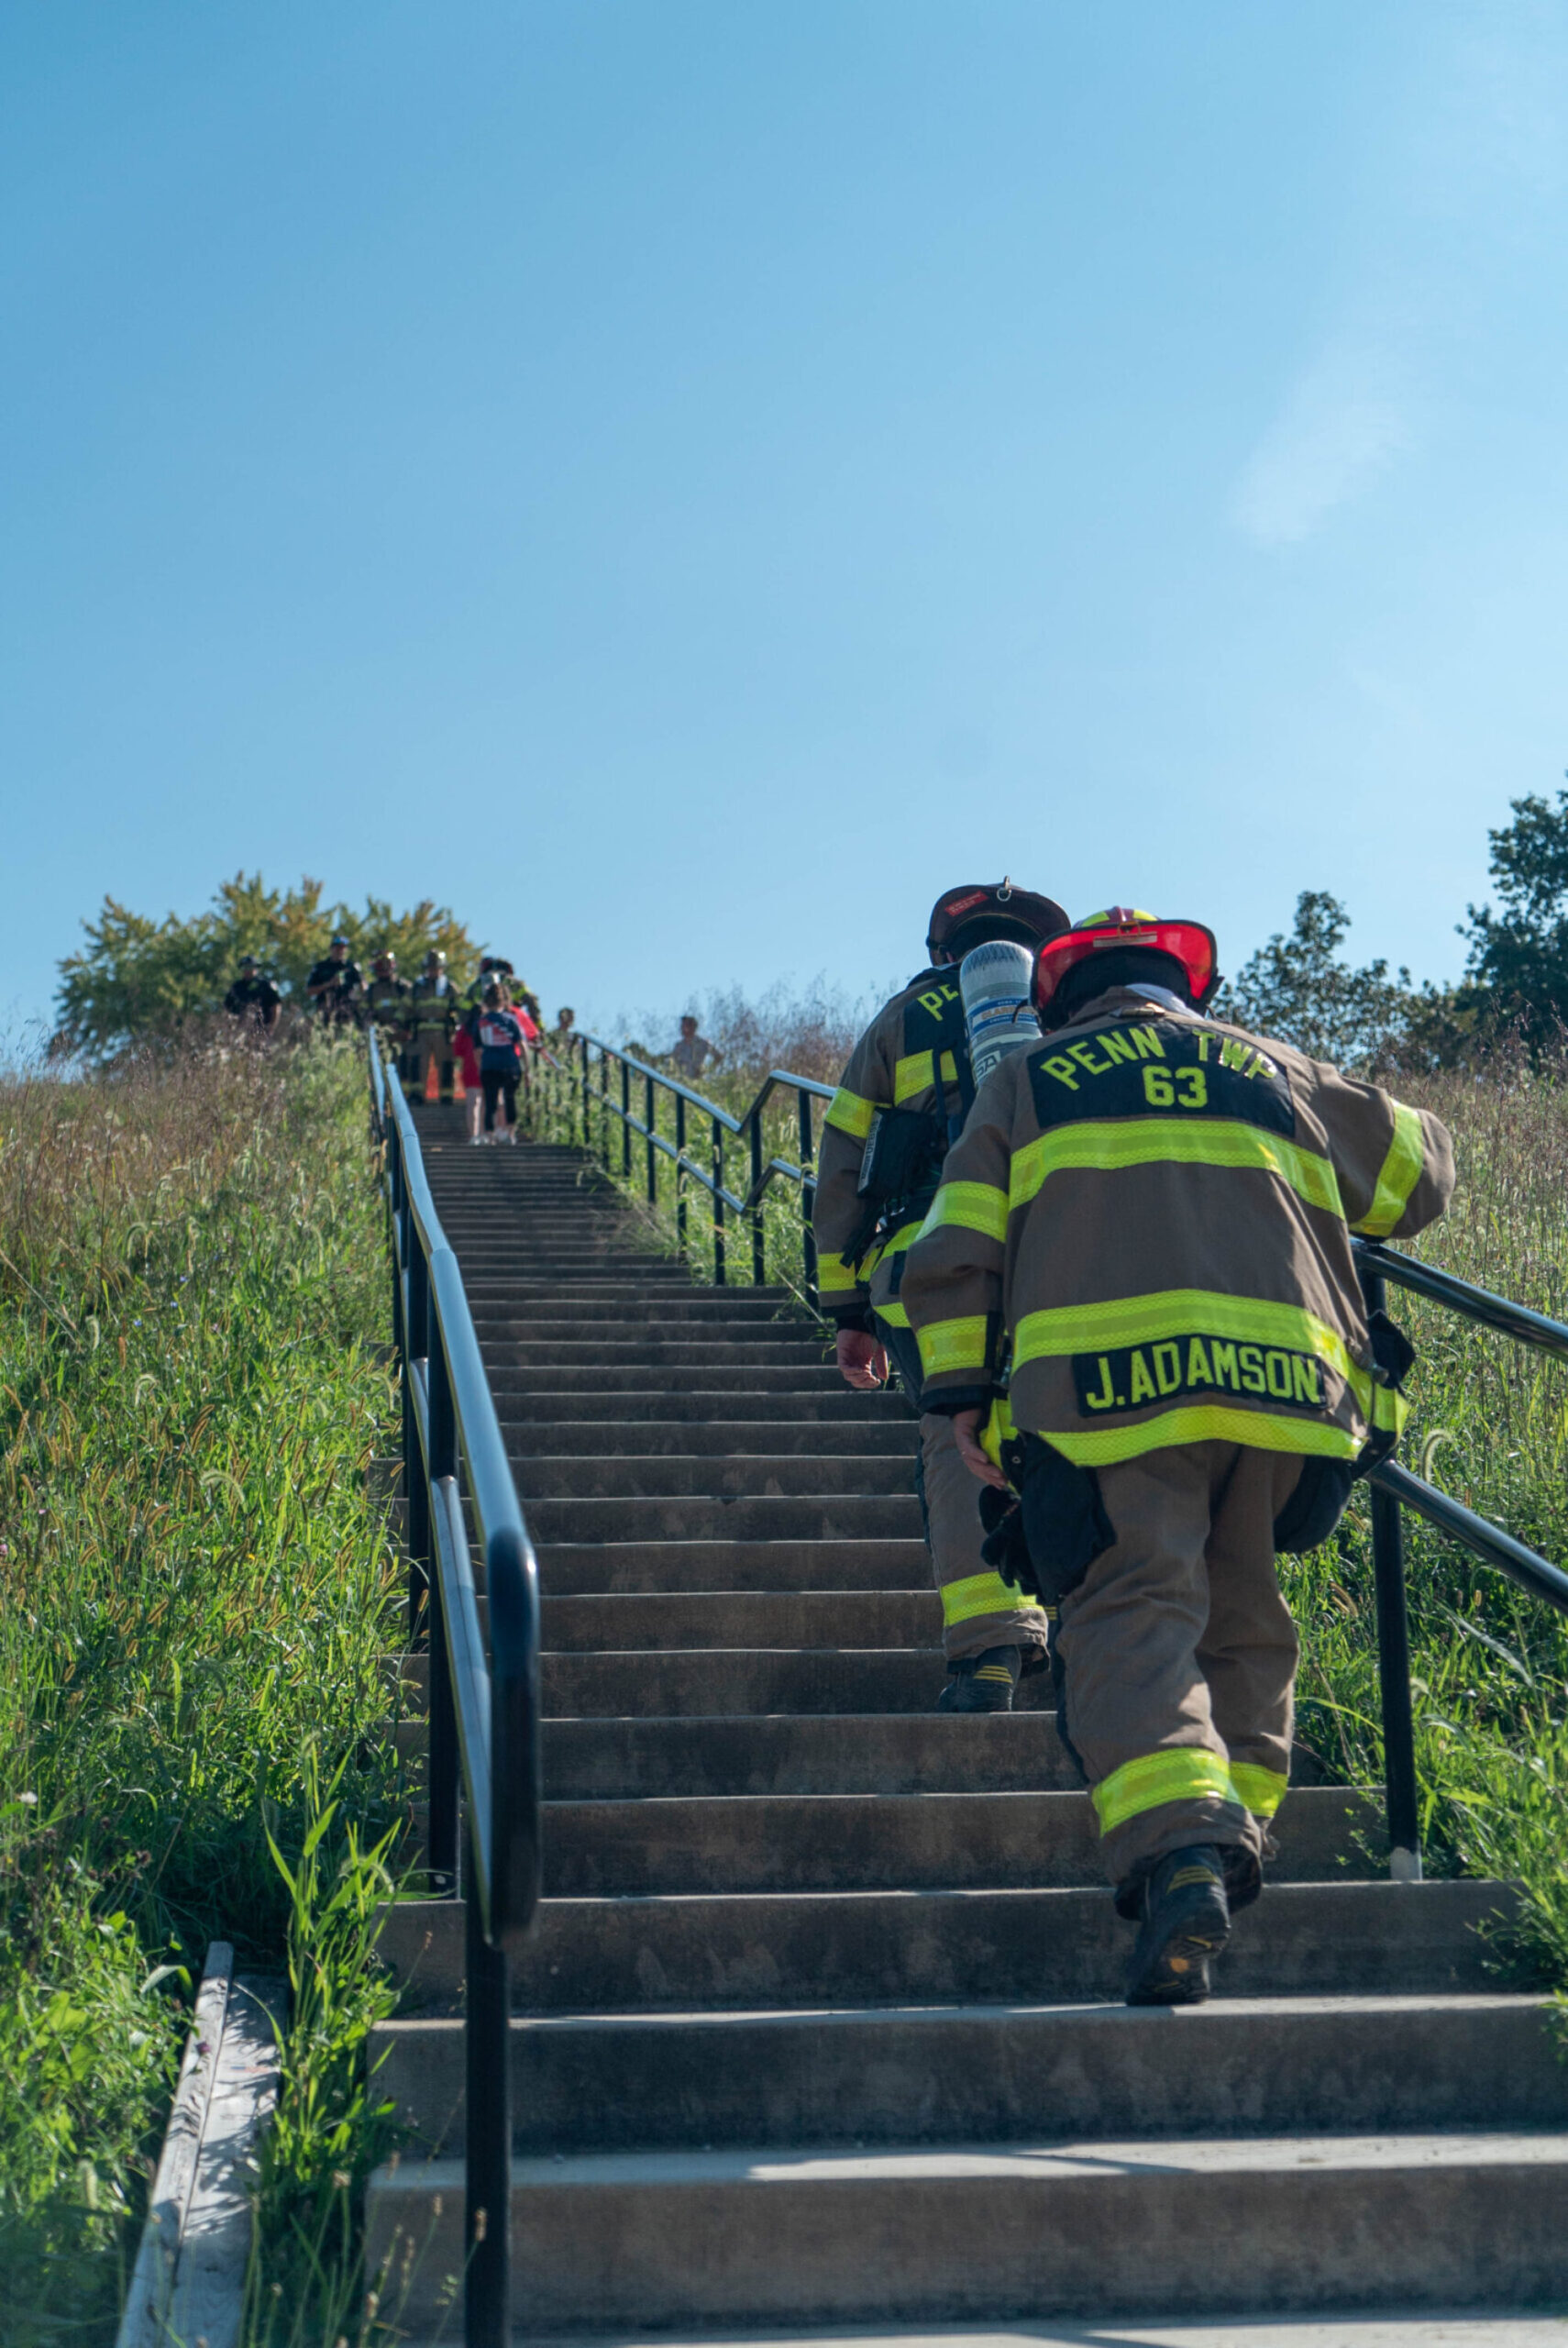 9/11 Stair Climb Sponsored by Fire Force and MSA